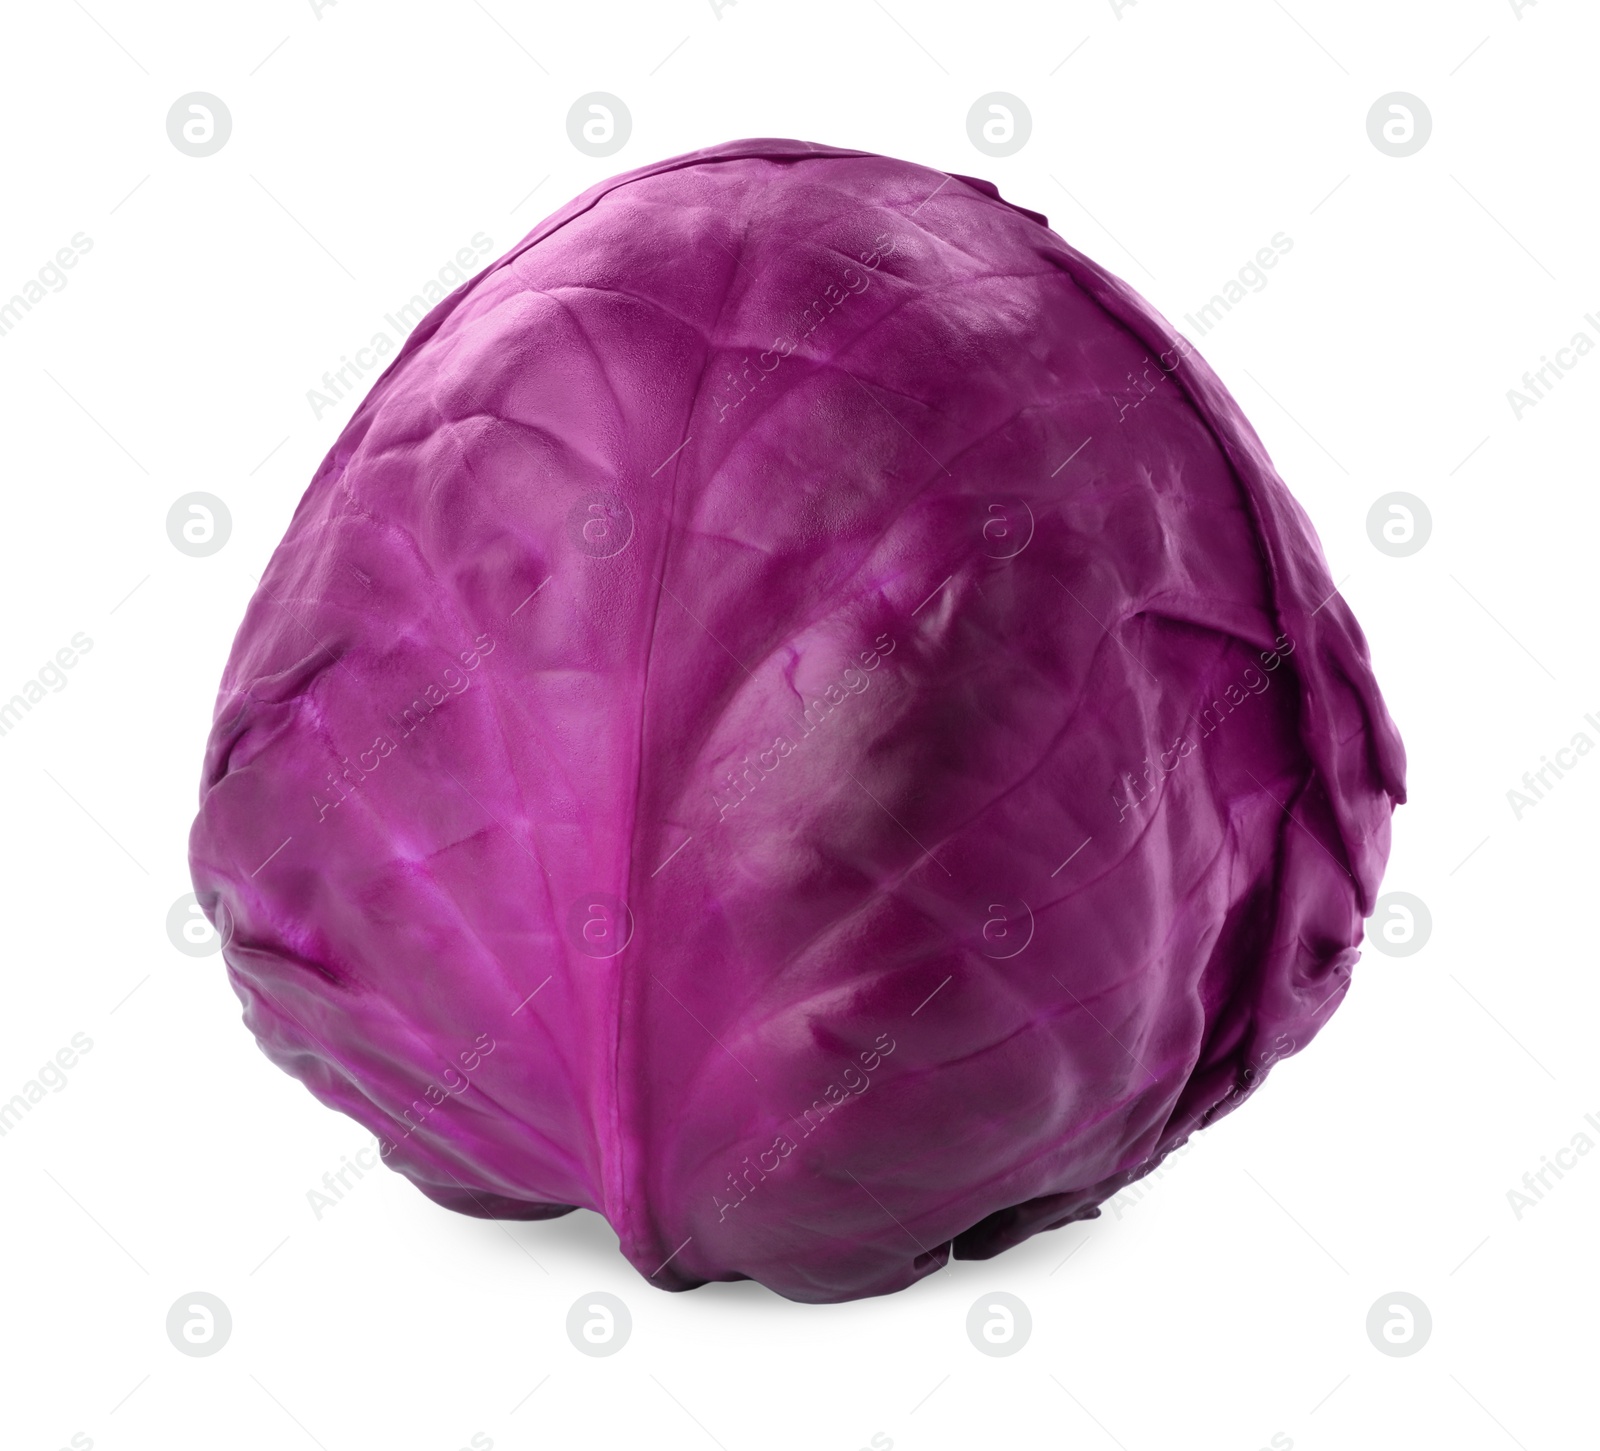 Photo of One fresh ripe red cabbage isolated on white